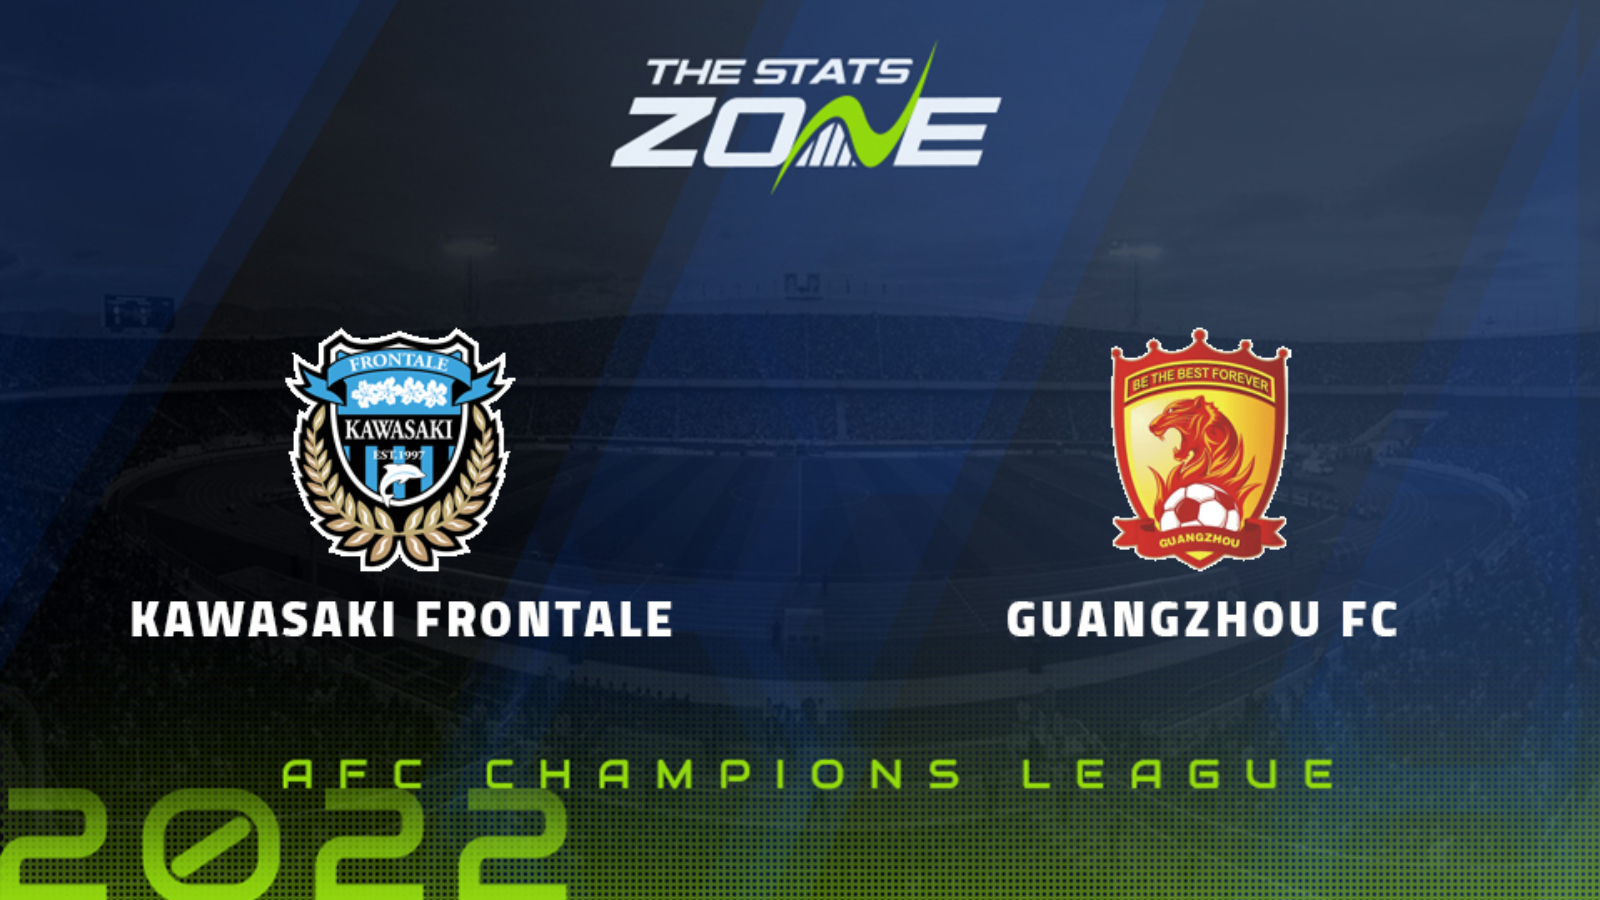 Kawasaki Frontale Vs Guangzhou Fc Group Stage Preview Prediction 22 Afc Champions League The Stats Zone